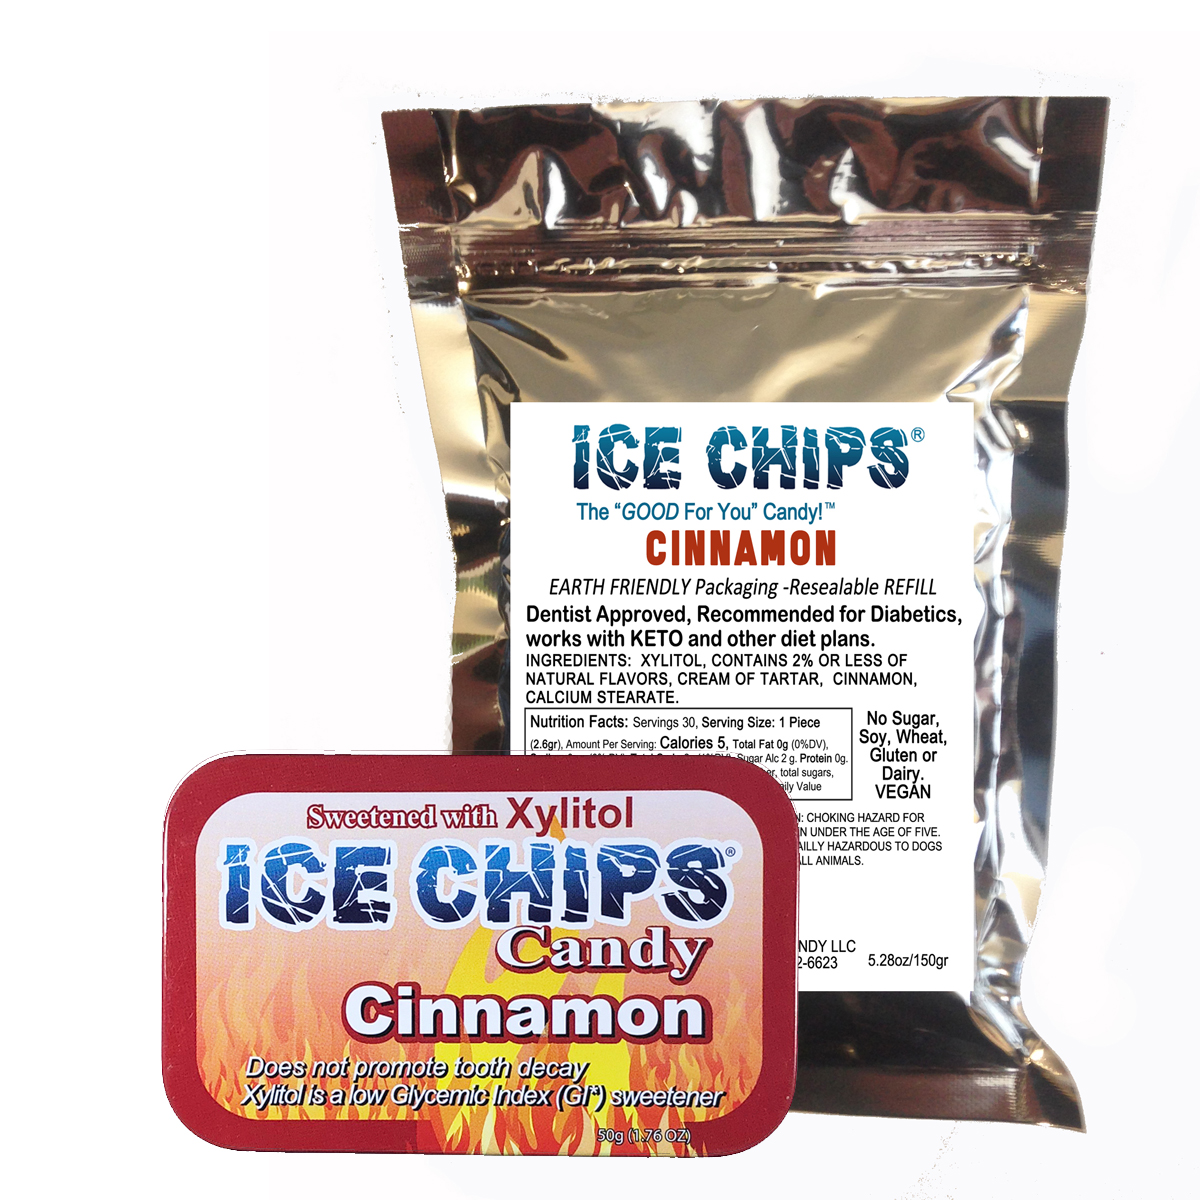 ICE CHIPS® Cinnamon Xylitol Candy